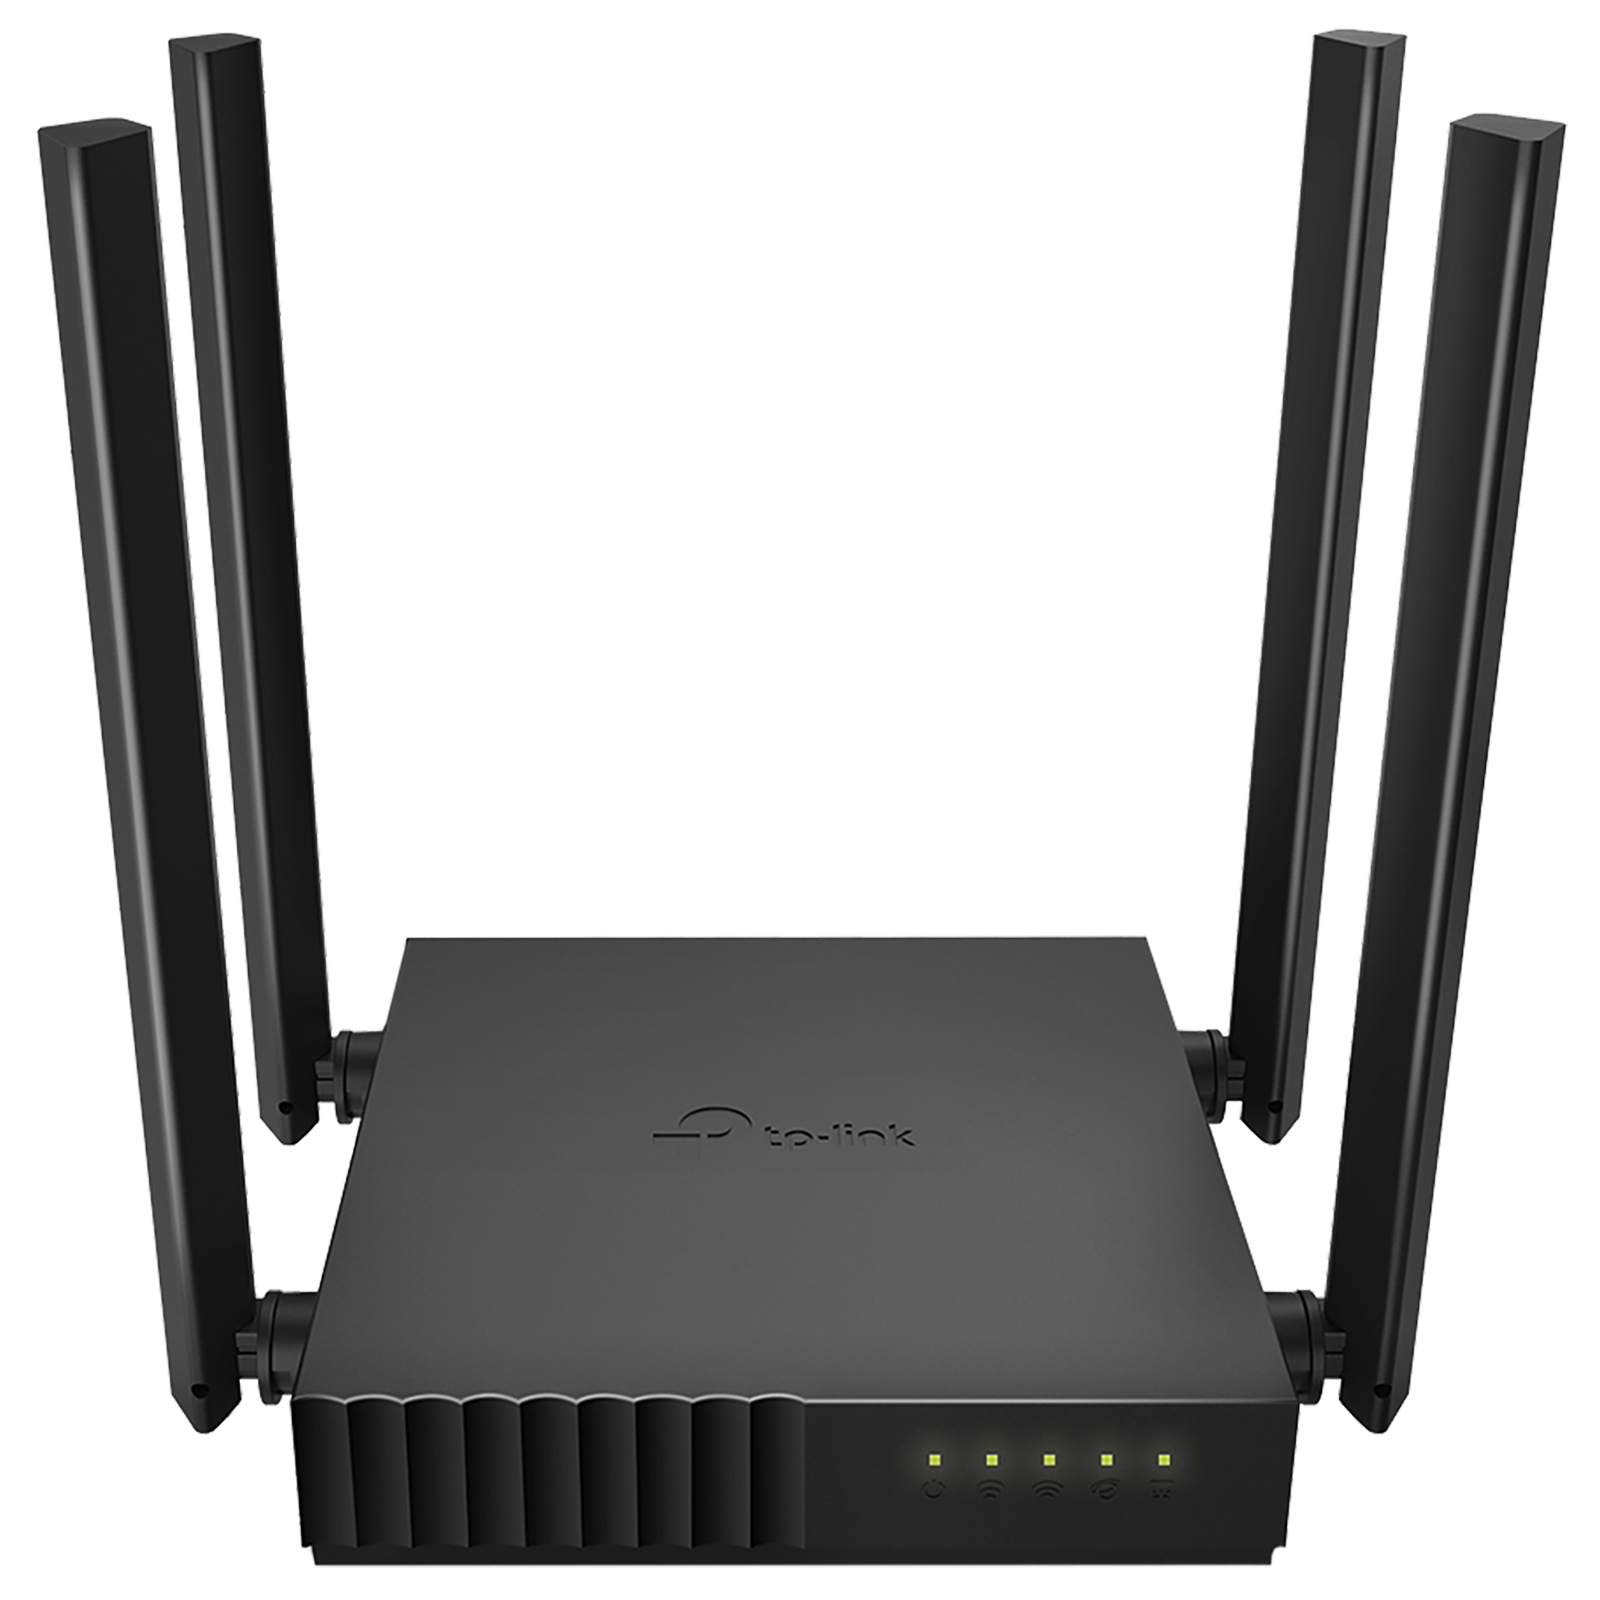 hyppigt Distribuere hat Buy Tp-Link Archer C54 AC1200 Dual Band Wi-Fi Router (4 Antennas, 4 LAN  Ports, IPv6 Supported, 1750502450, Black) Online - Croma